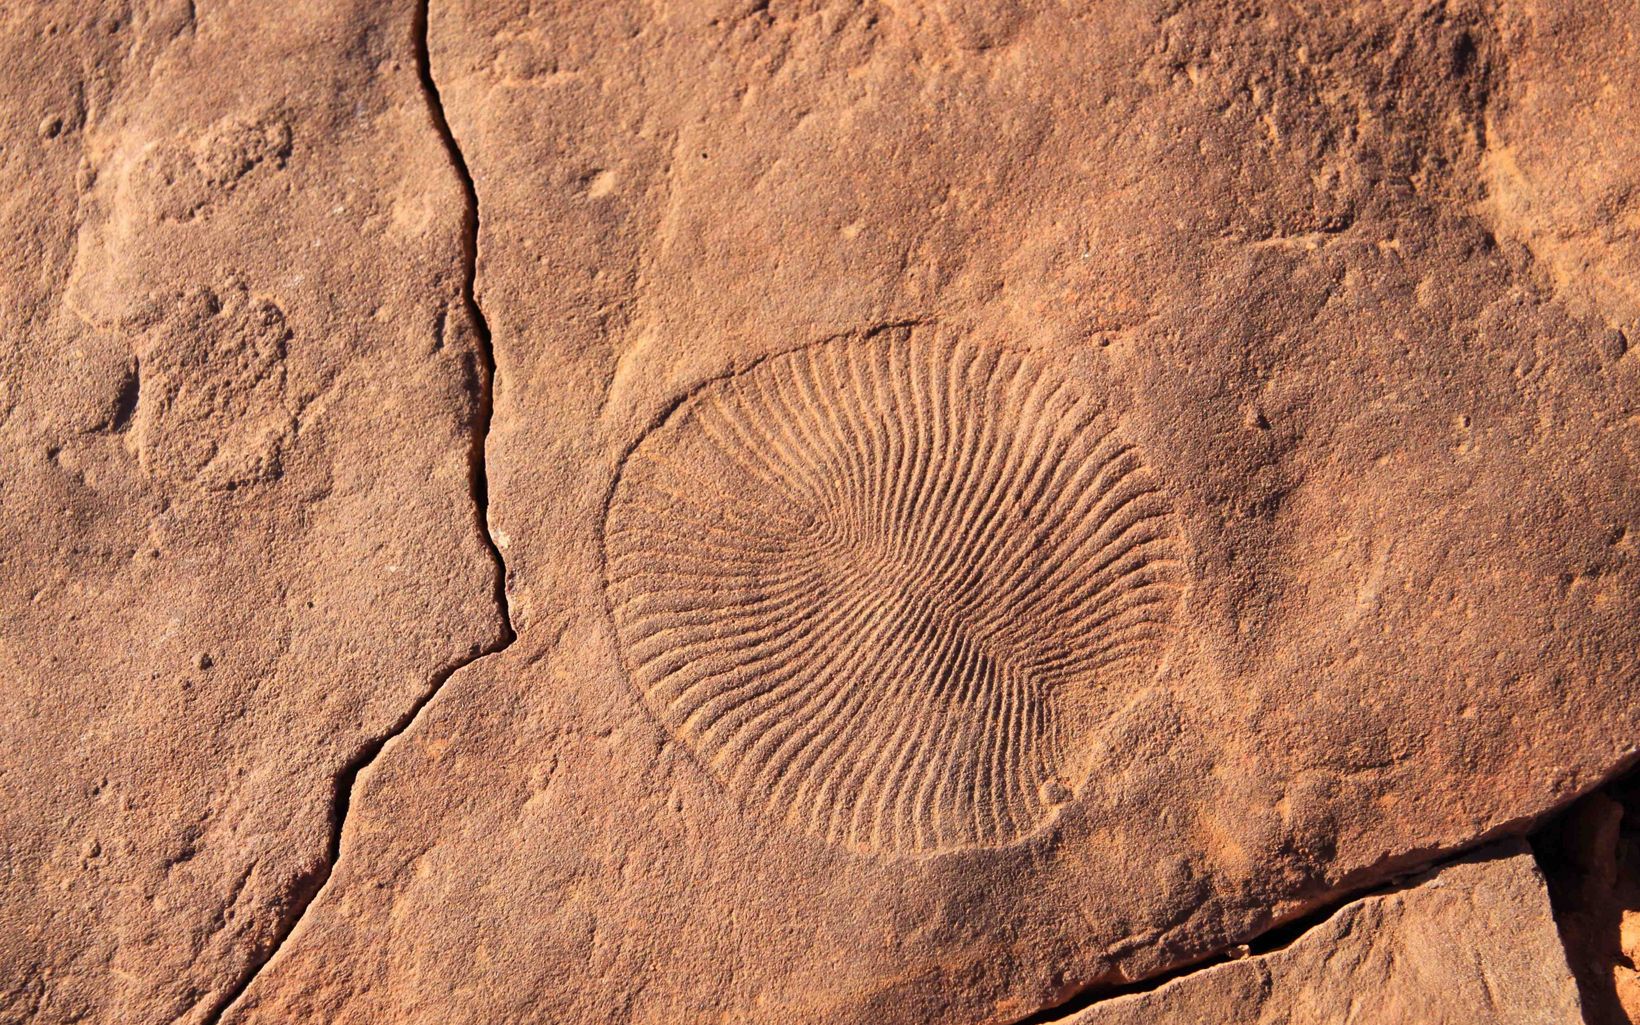 Dickinsonia fossil one the the Earth's first animals, at Nilpena © Jason Irving / South Australian Department of the Environment and Water 